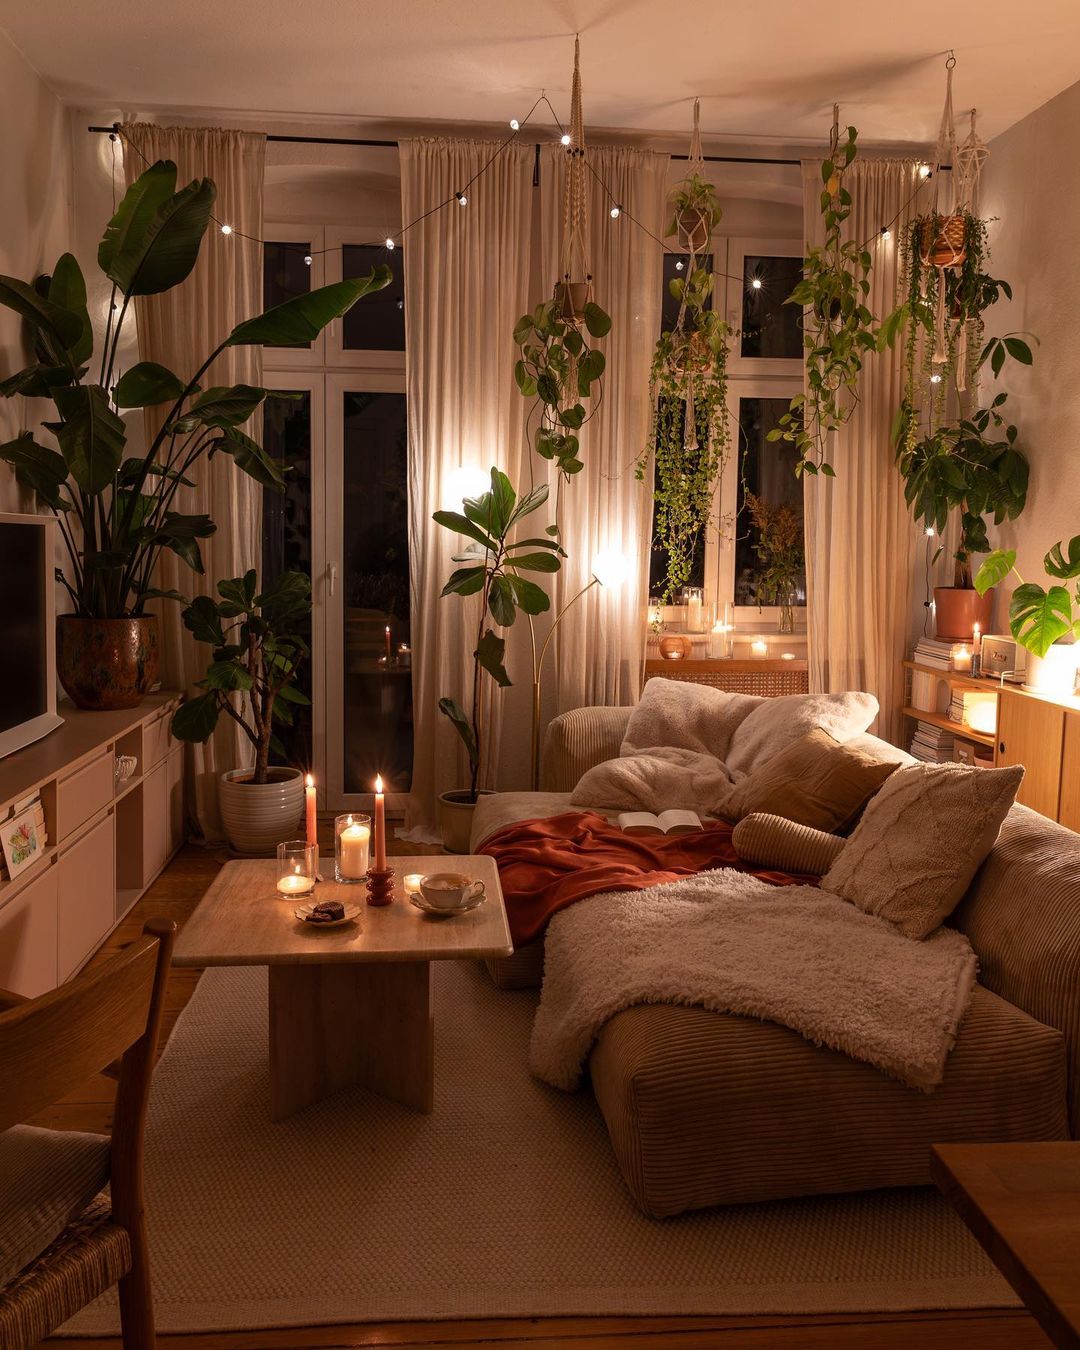 a living room with bohemian-inspired decor including greenery, candles, and lots of textiles can be used to decode the secrets of bohemian decor.